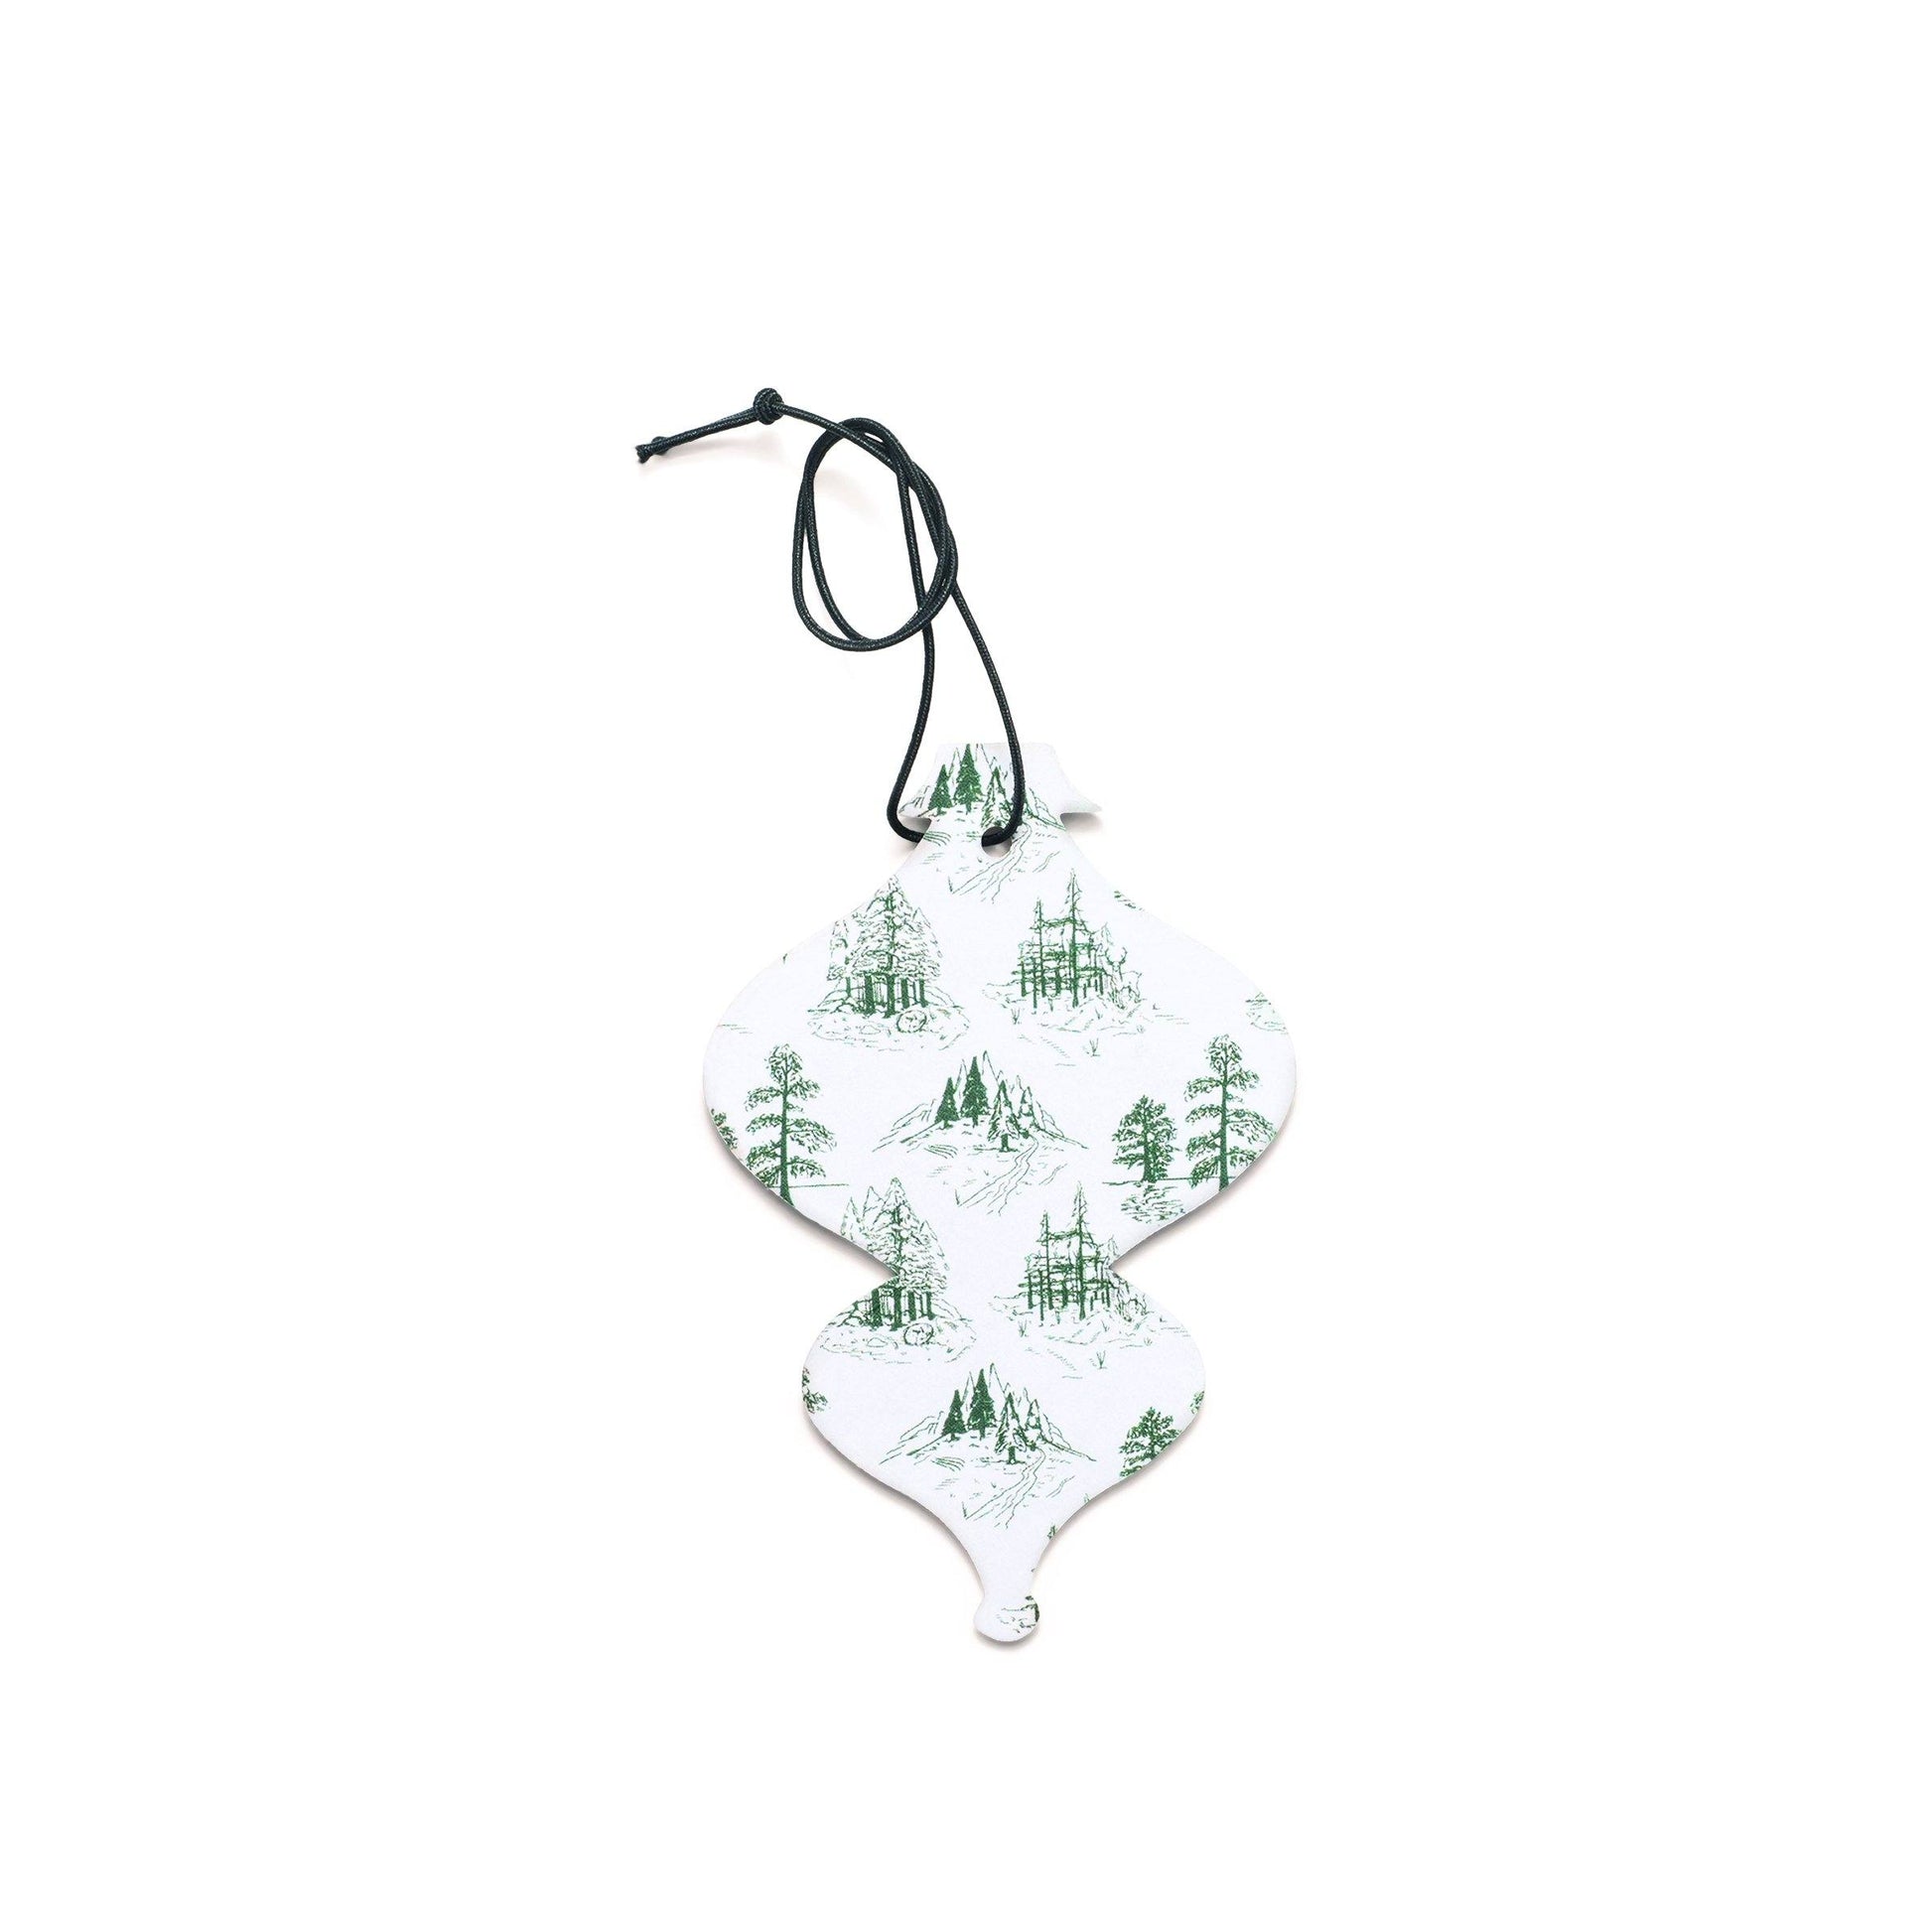 ornament-shaped white car fragrance styled with green sketches of fir trees and landscapes; cypress and fir scent